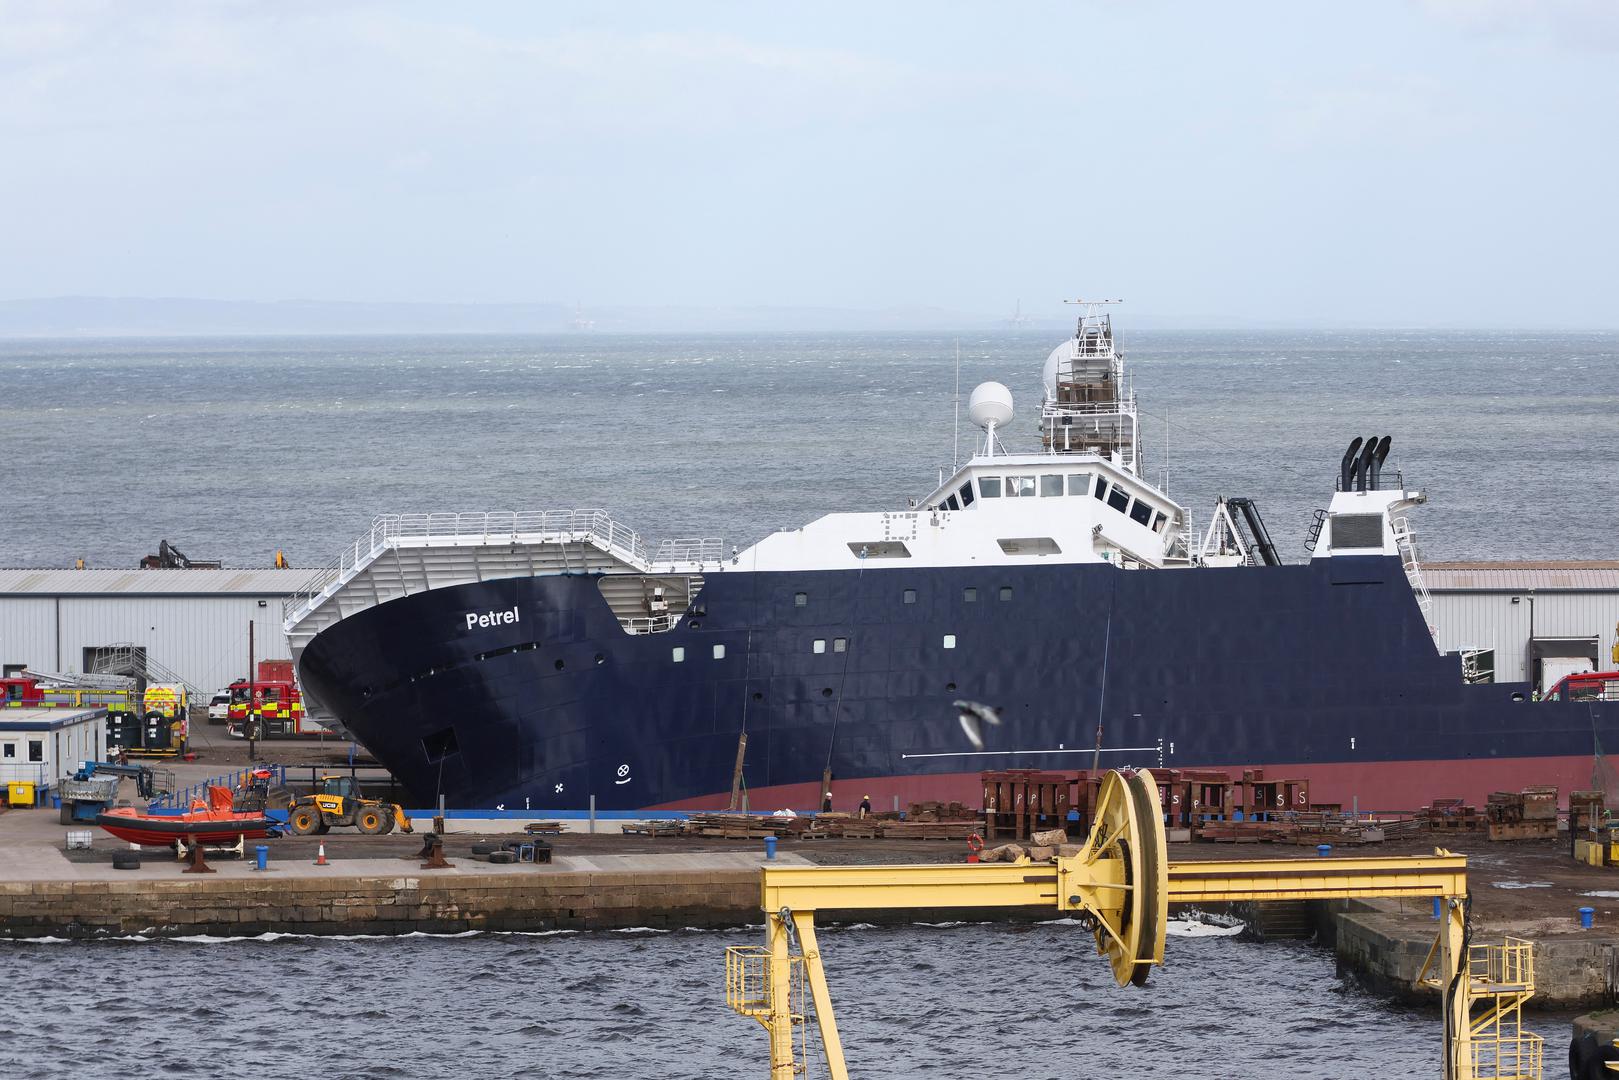 View of the research vessel Petrel after it tipped on its side in a dry dock in Leith, near Edinburgh, Scotland, Britain, March 22, 2023. REUTERS/Russell Cheyne Photo: RUSSELL CHEYNE/REUTERS